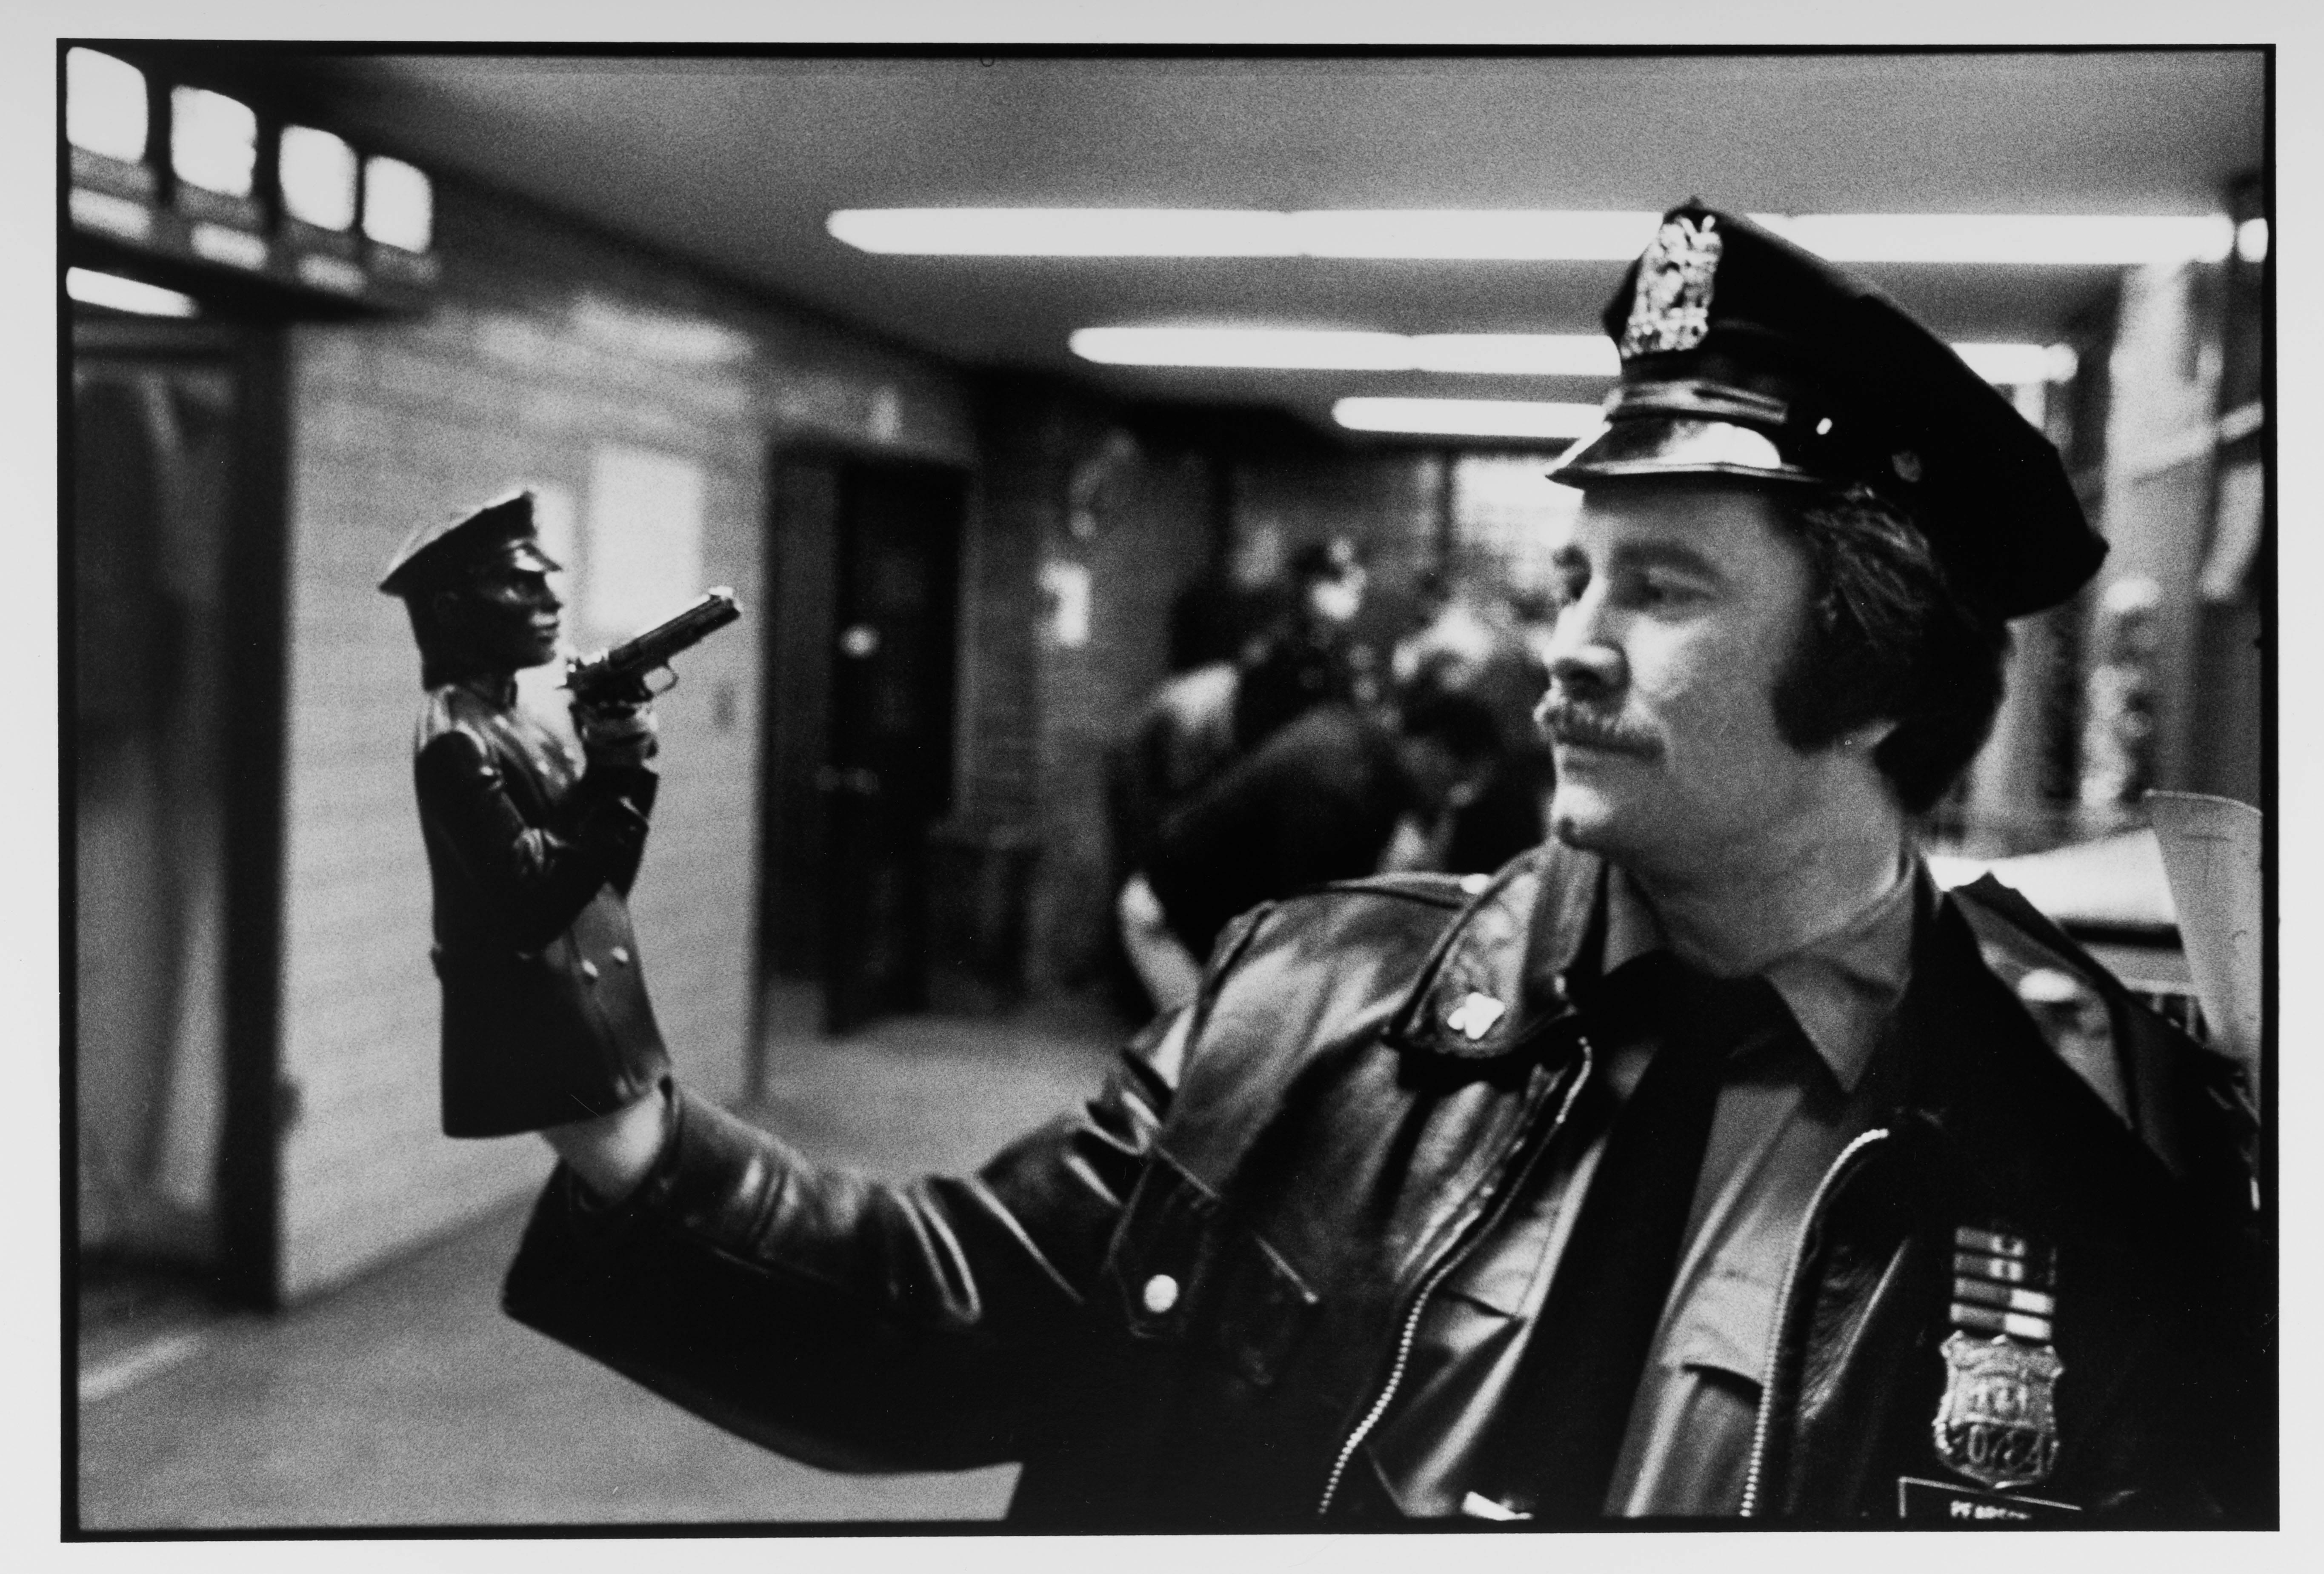 Leonard Freed Black and White Photograph - NYC Police Work